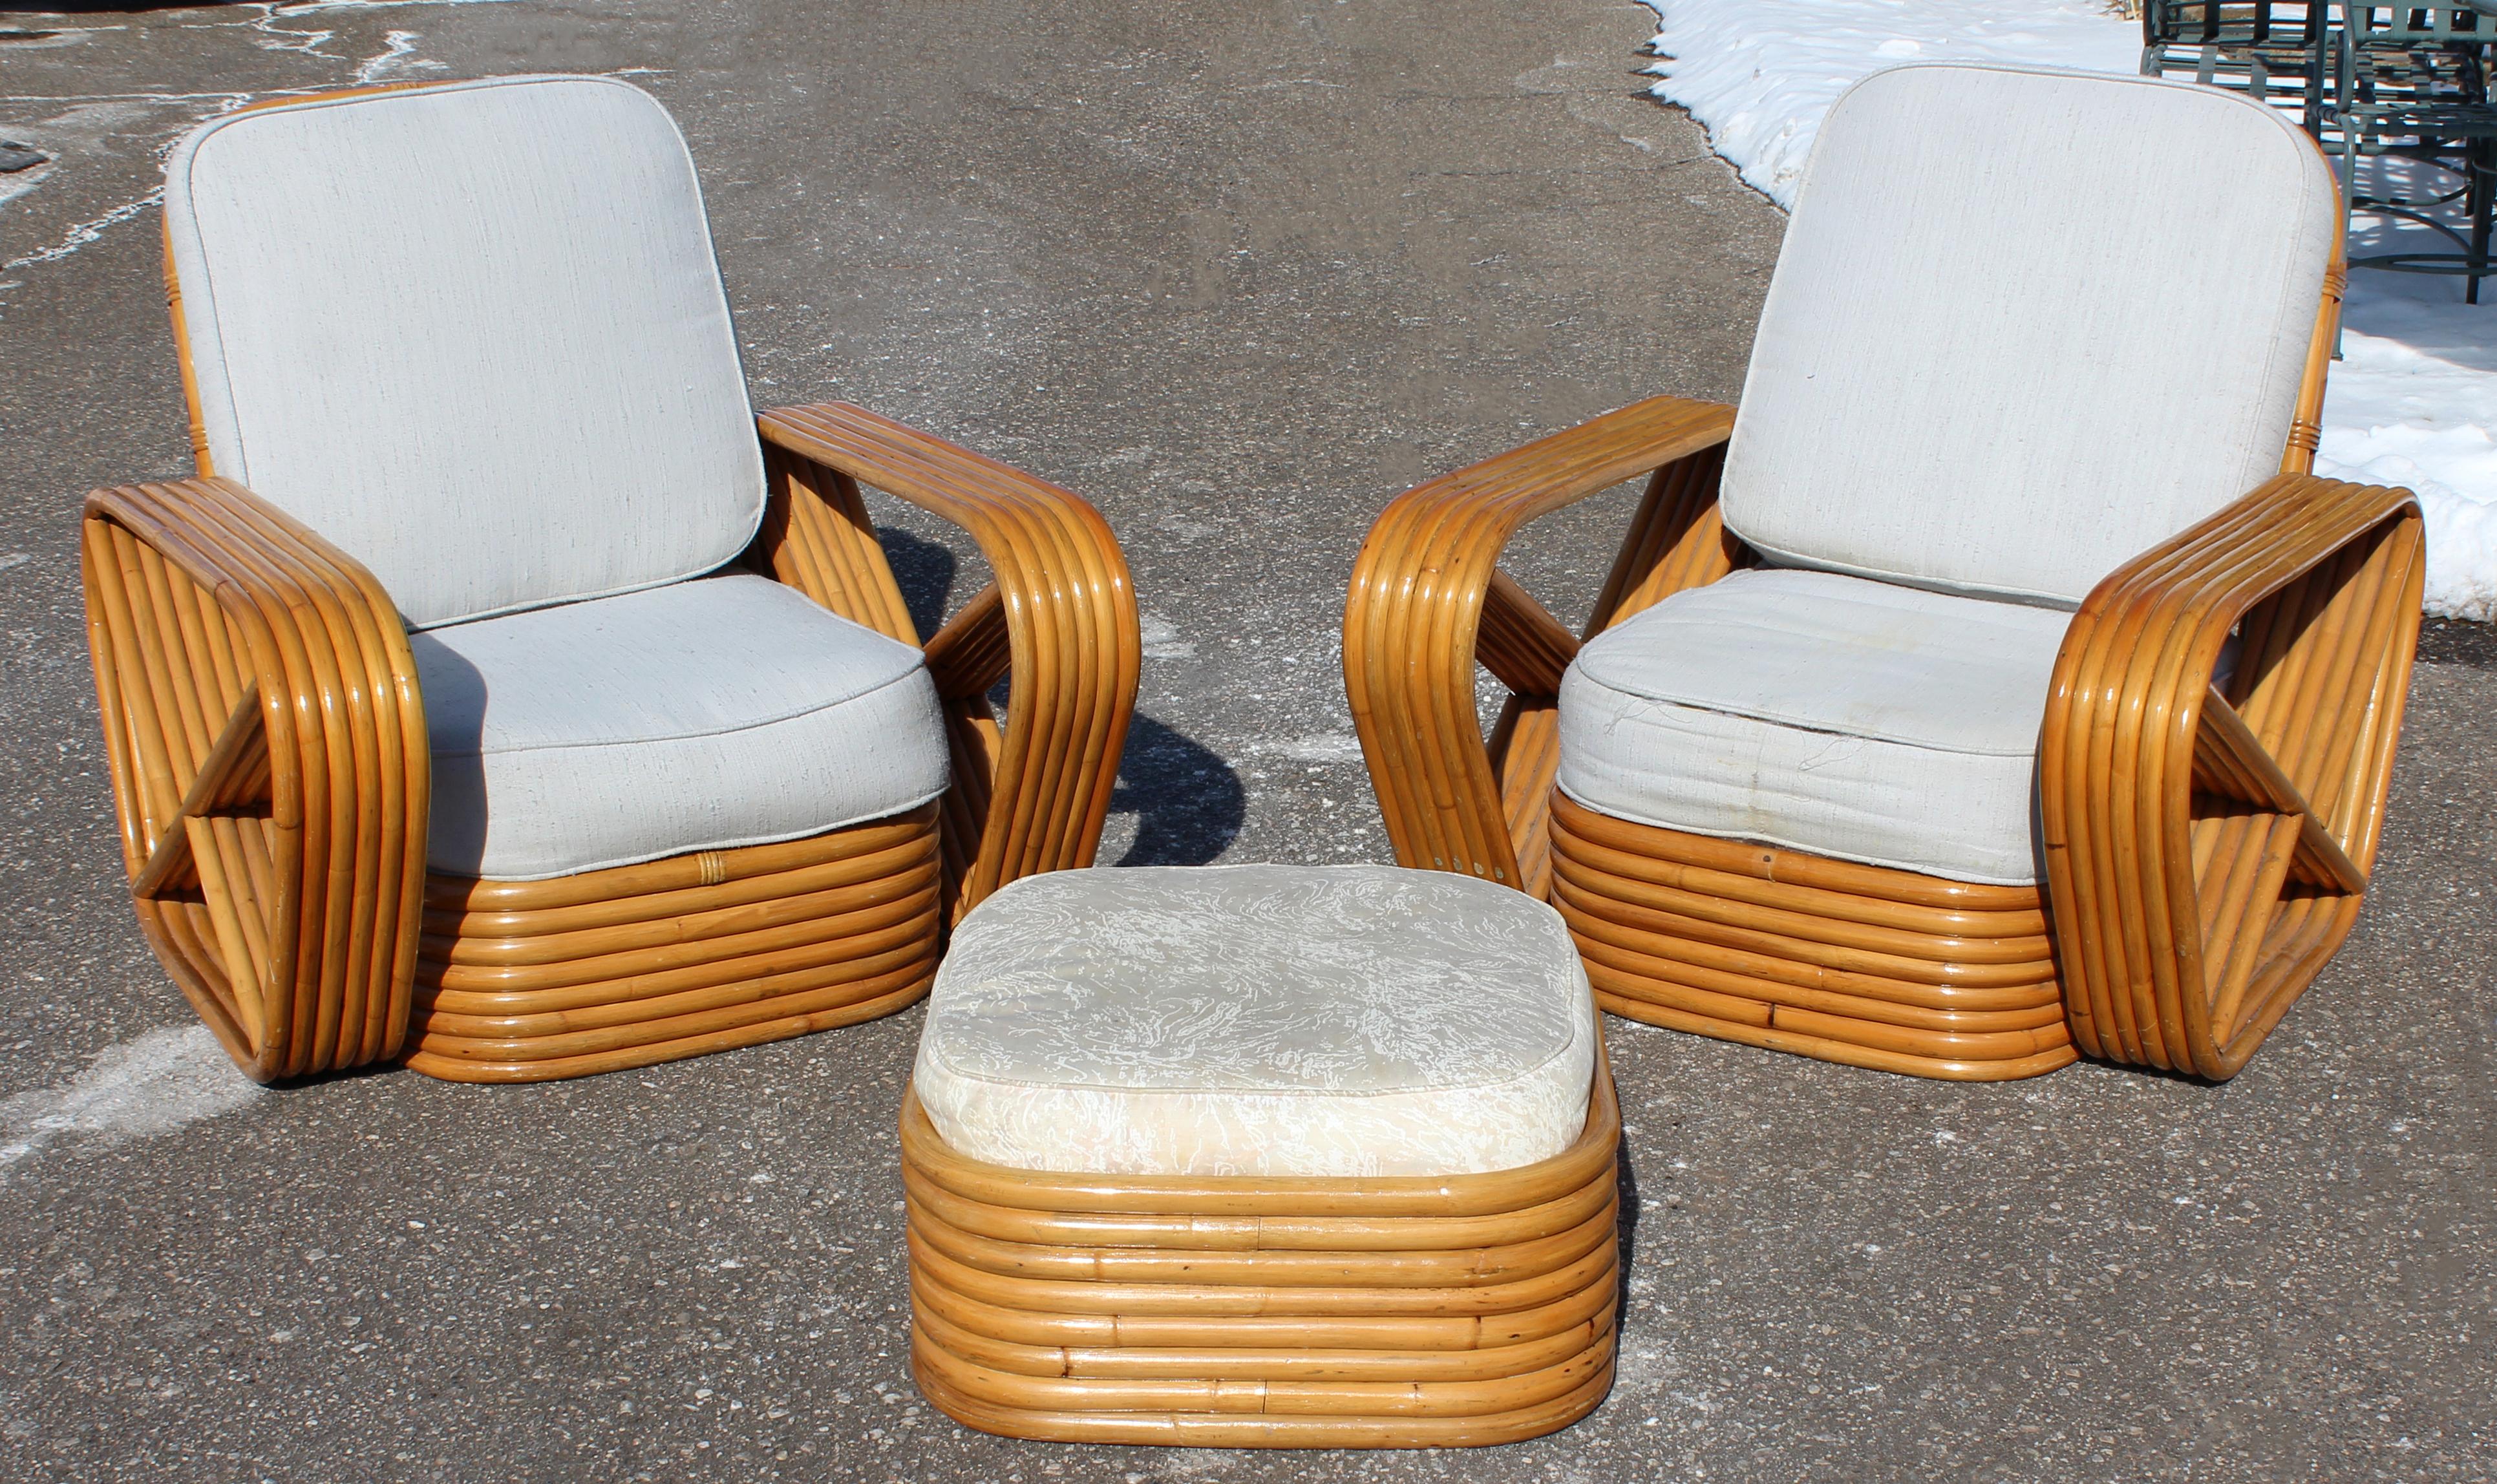 For your consideration is a phenomenal pair of rattan, patio lounge armchairs and matching ottoman, by Paul Frankl, in his 